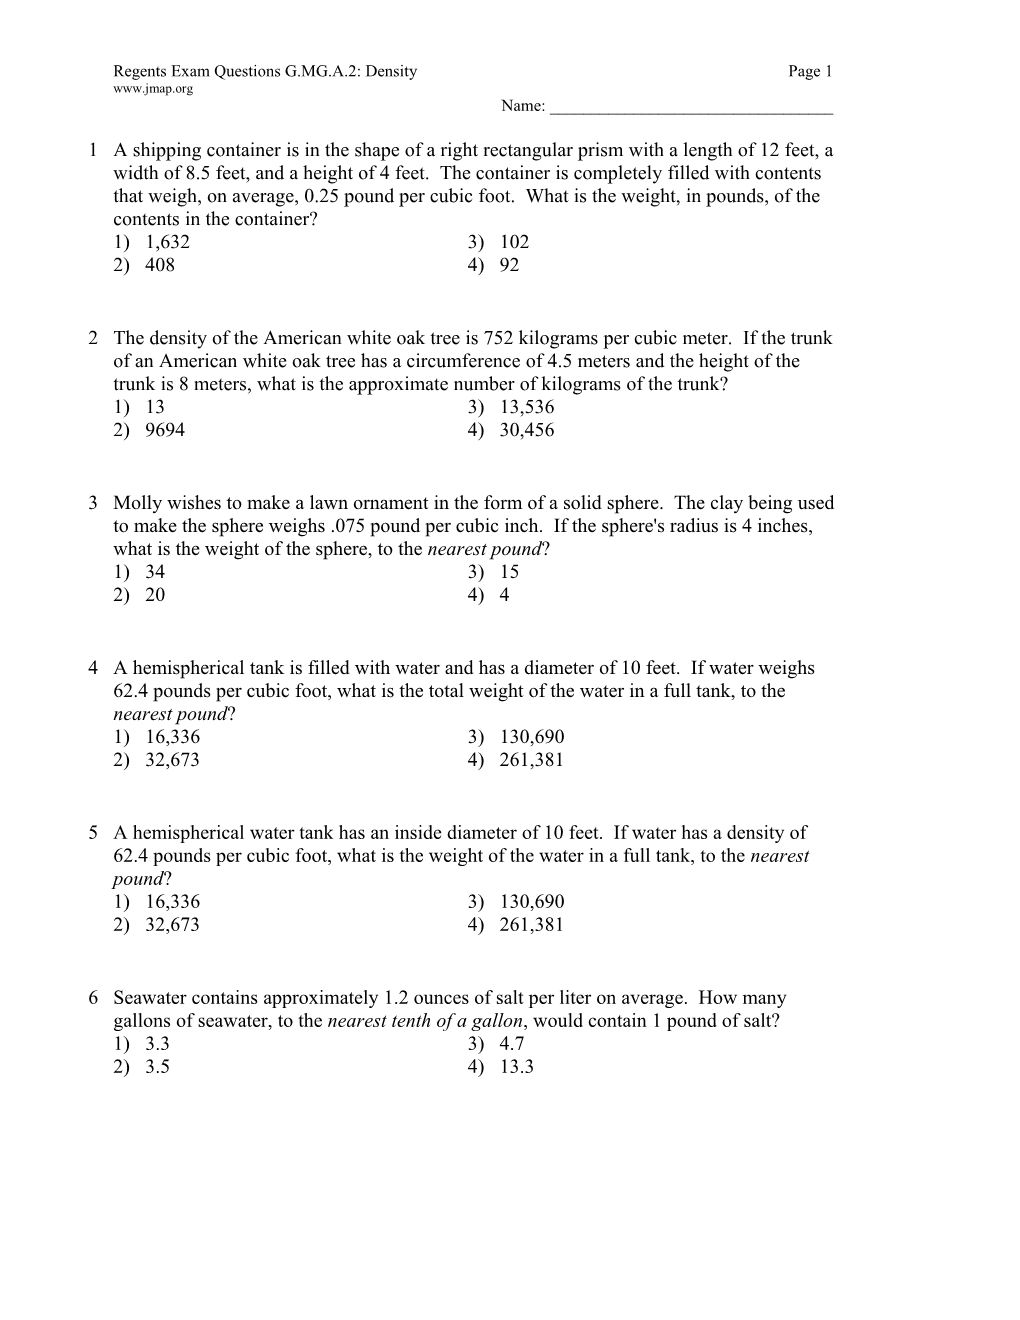 Regents Exam Questions G.MG.A.2: Densitypage 1